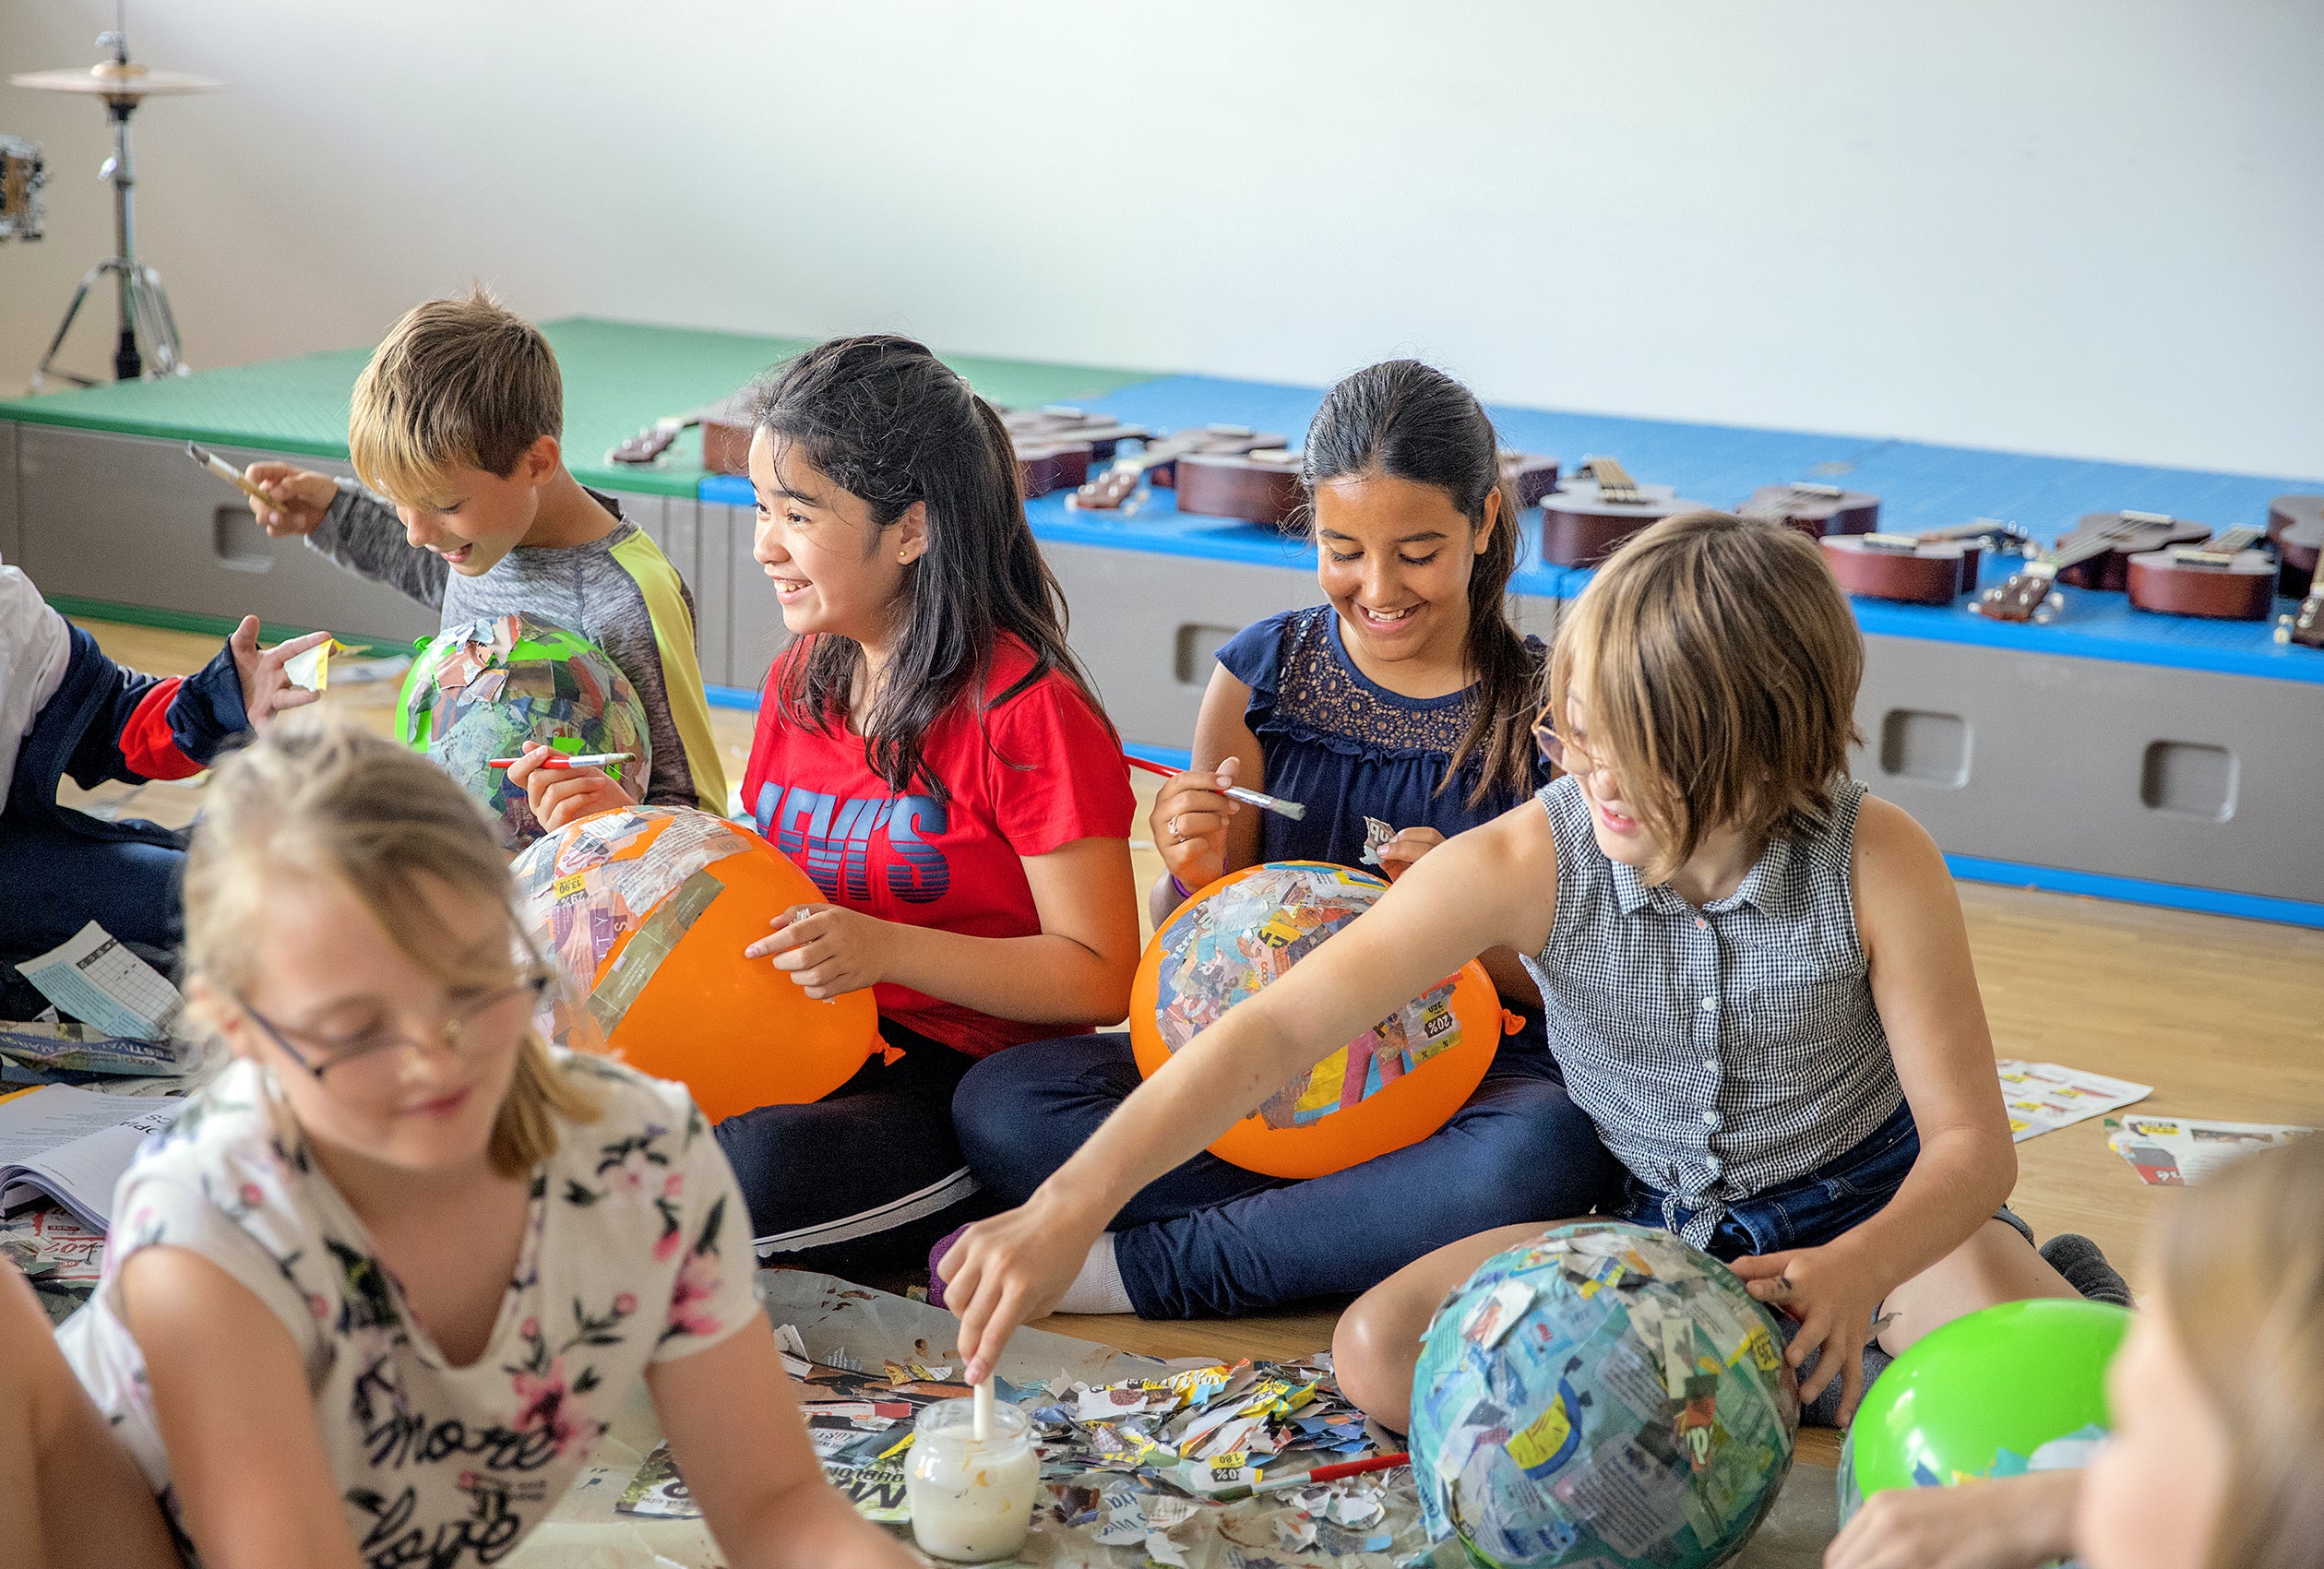 Junior Camp – English language courses and afternoon multi-activity, 9 to 12 years old